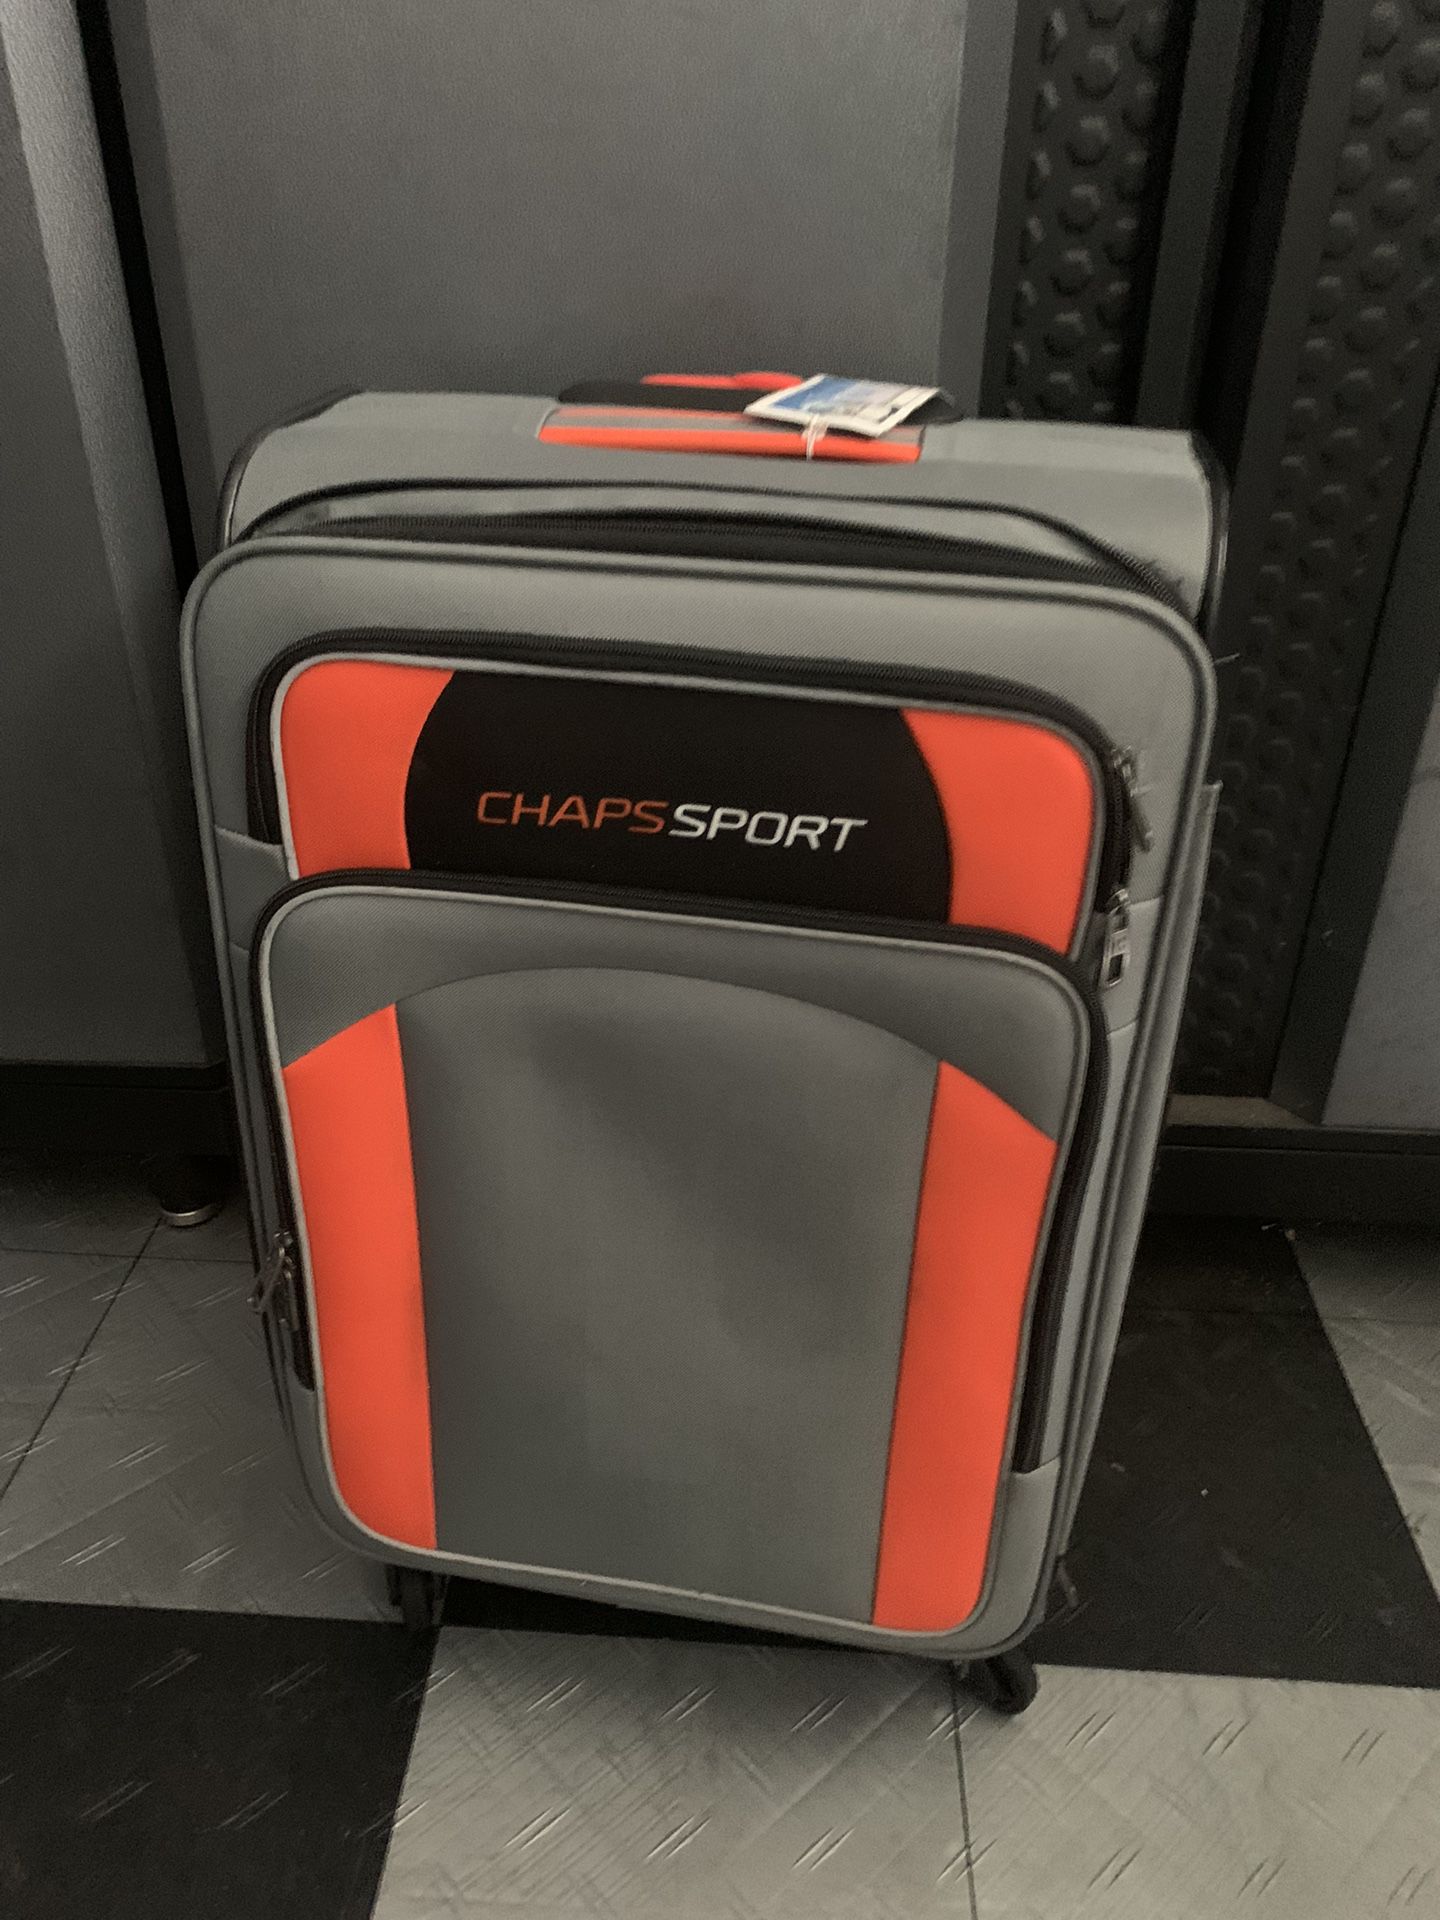 Chaps Sport Travel Luggage/Suitcase 27" x 16" × 10"